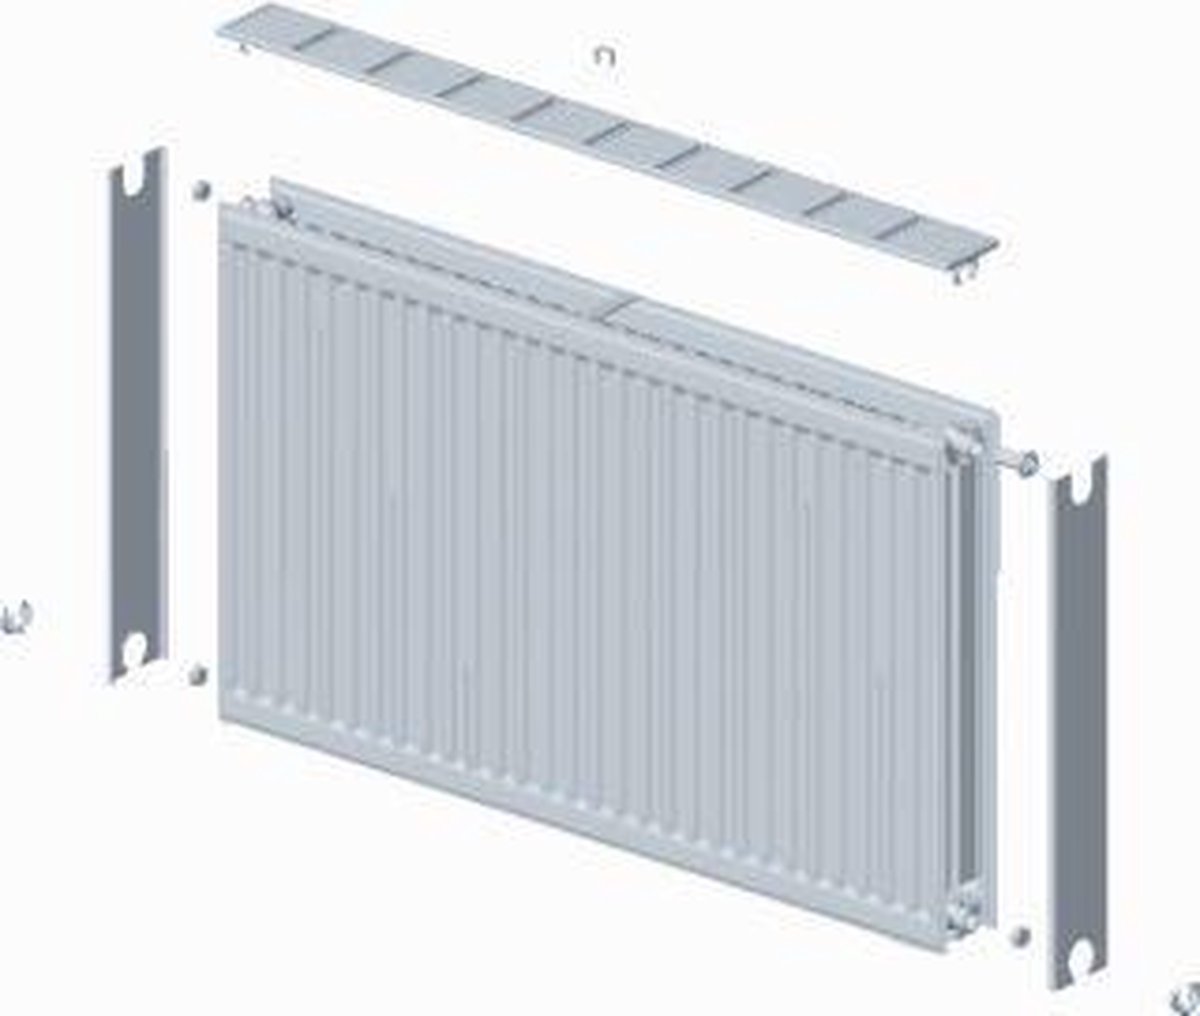 Stelrad paneelradiator Novello, staal, wit, (hxlxd) 300x1800x100mm, 22